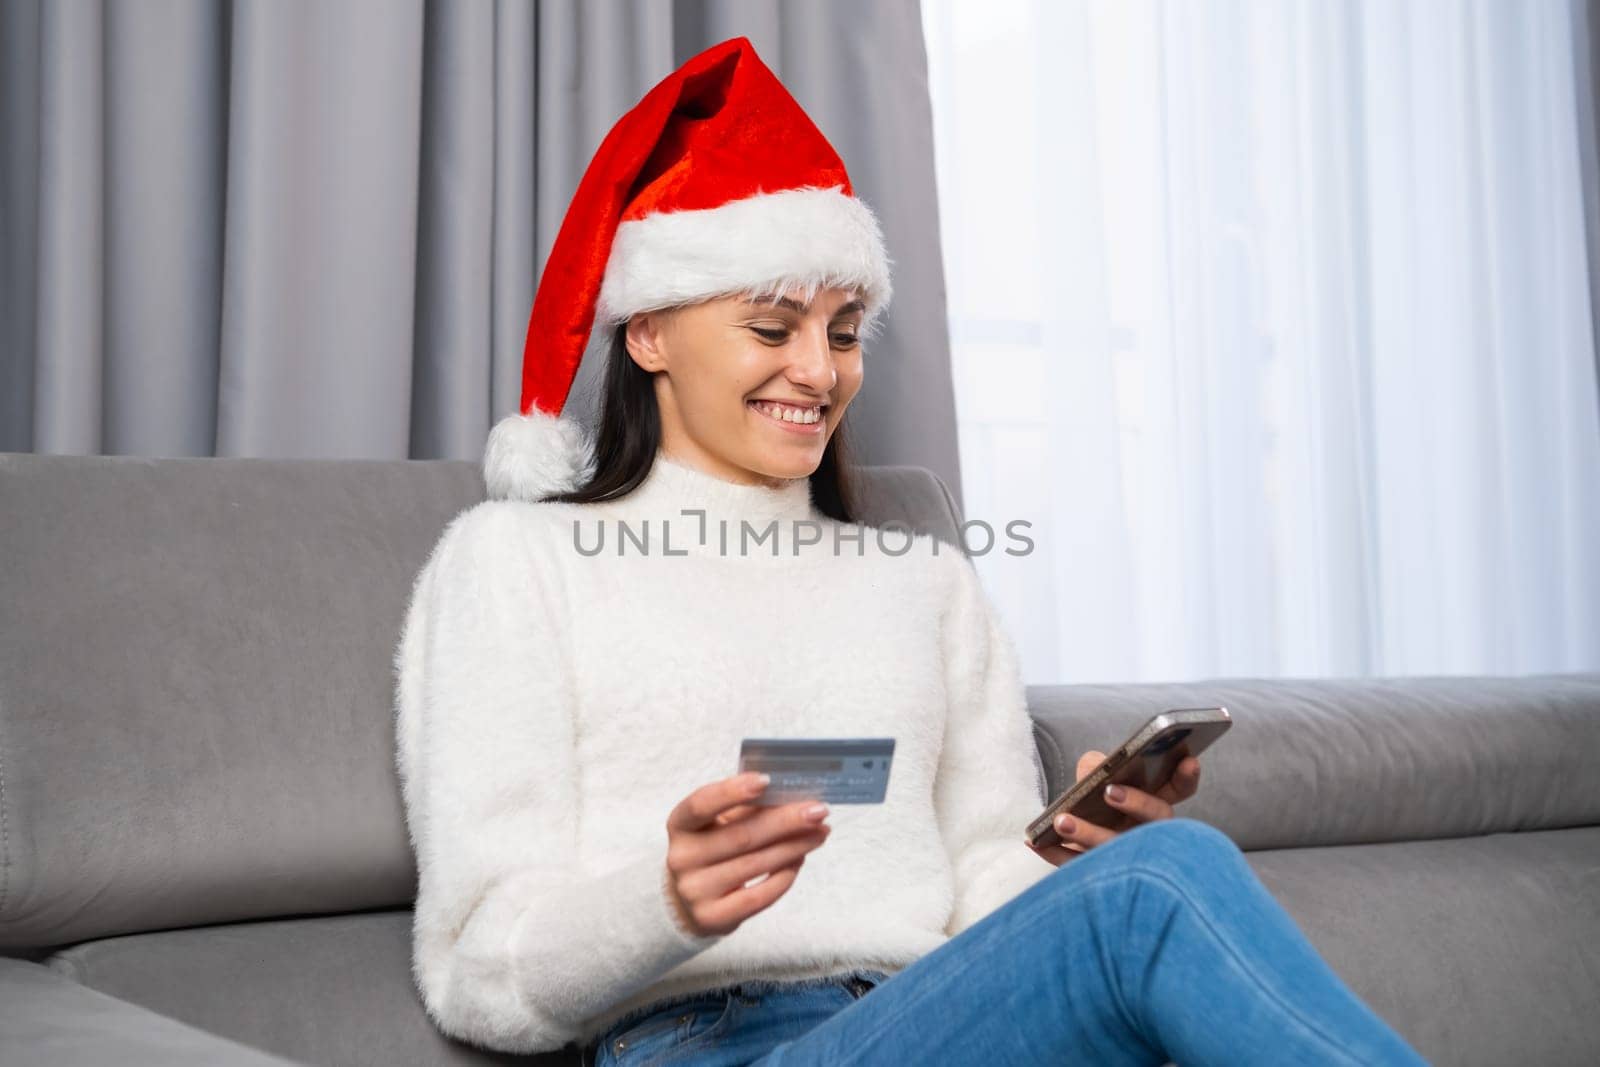 A woman in a red Santa Claus hat purchases Christmas gifts via the Internet using a mobile phone and credit card sitting in the living room.